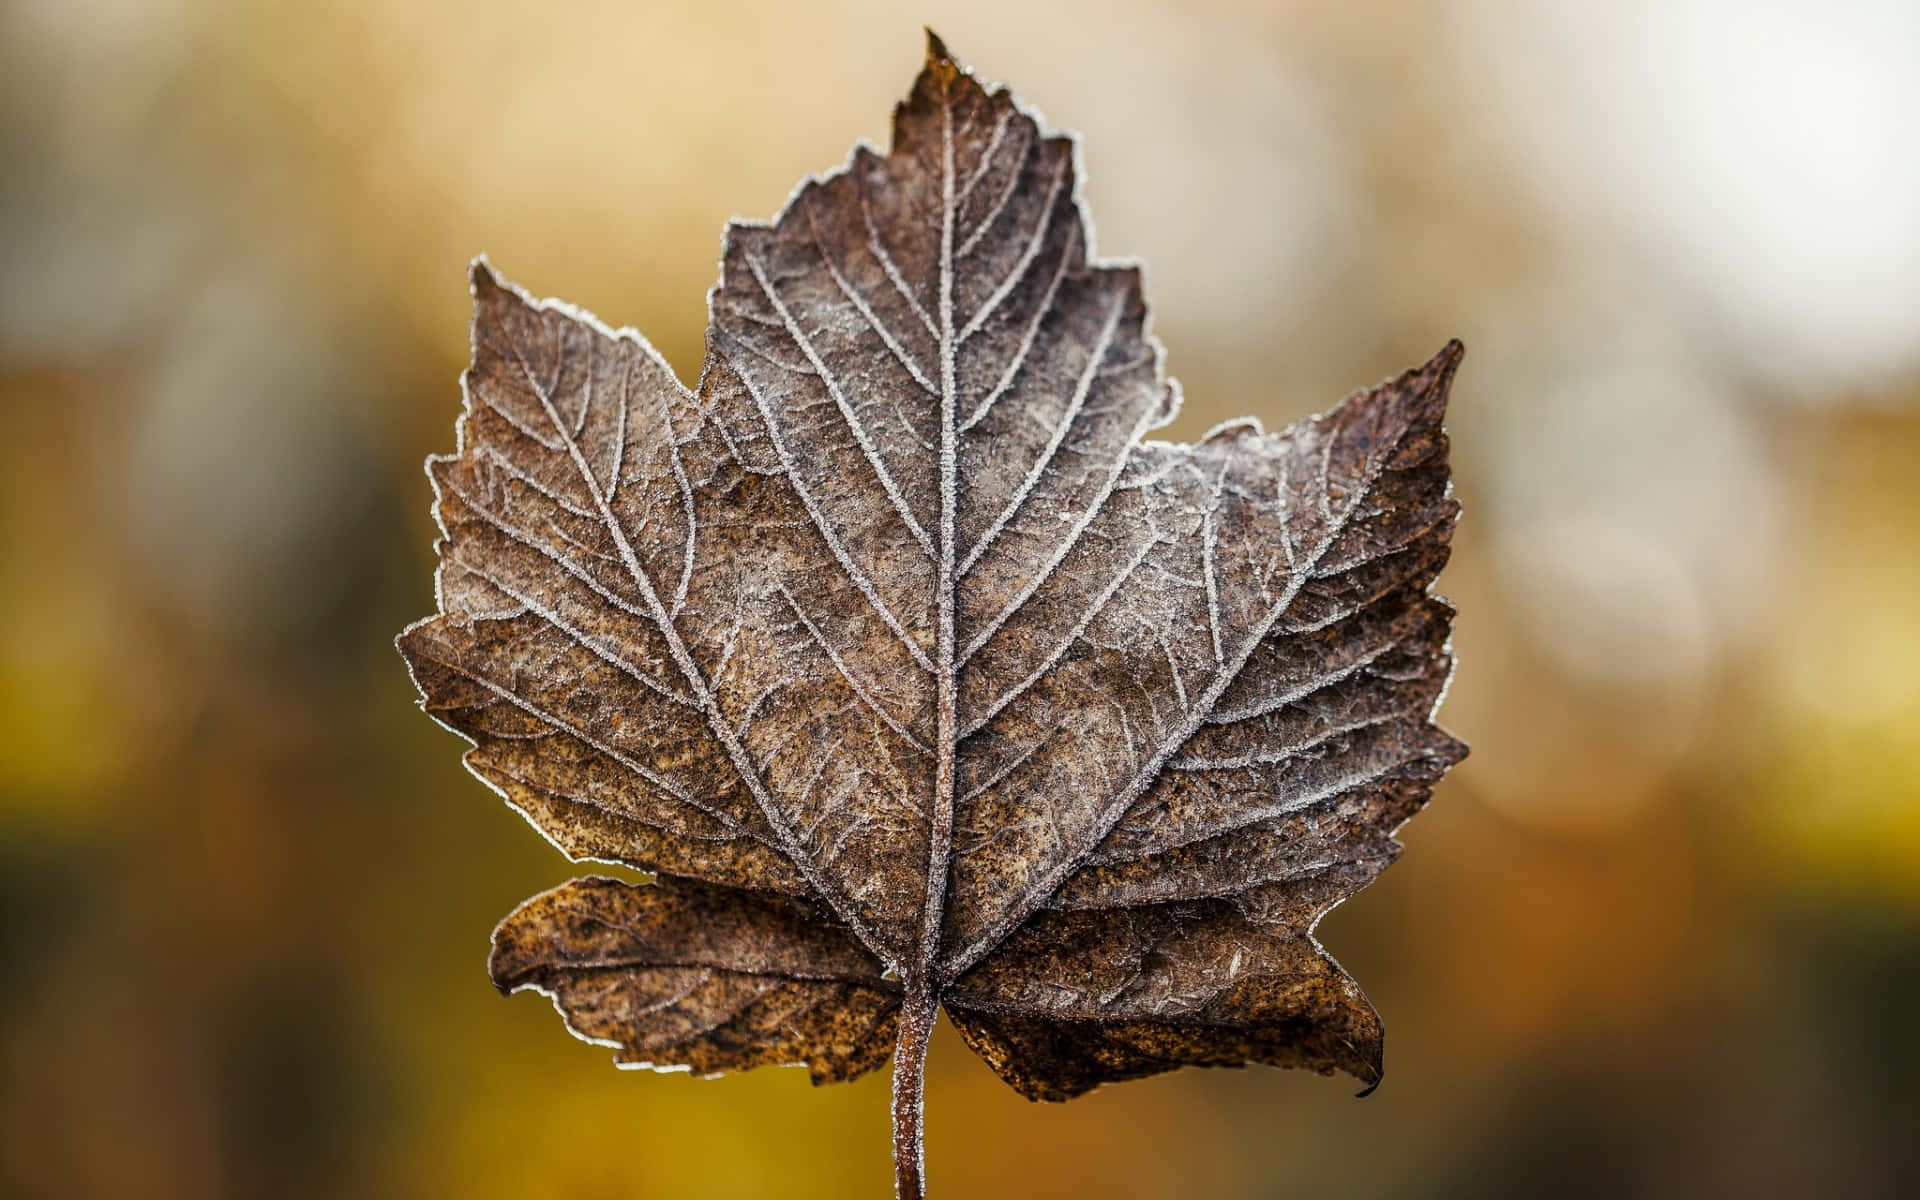 A beautiful red Maple Leaf captured in nature